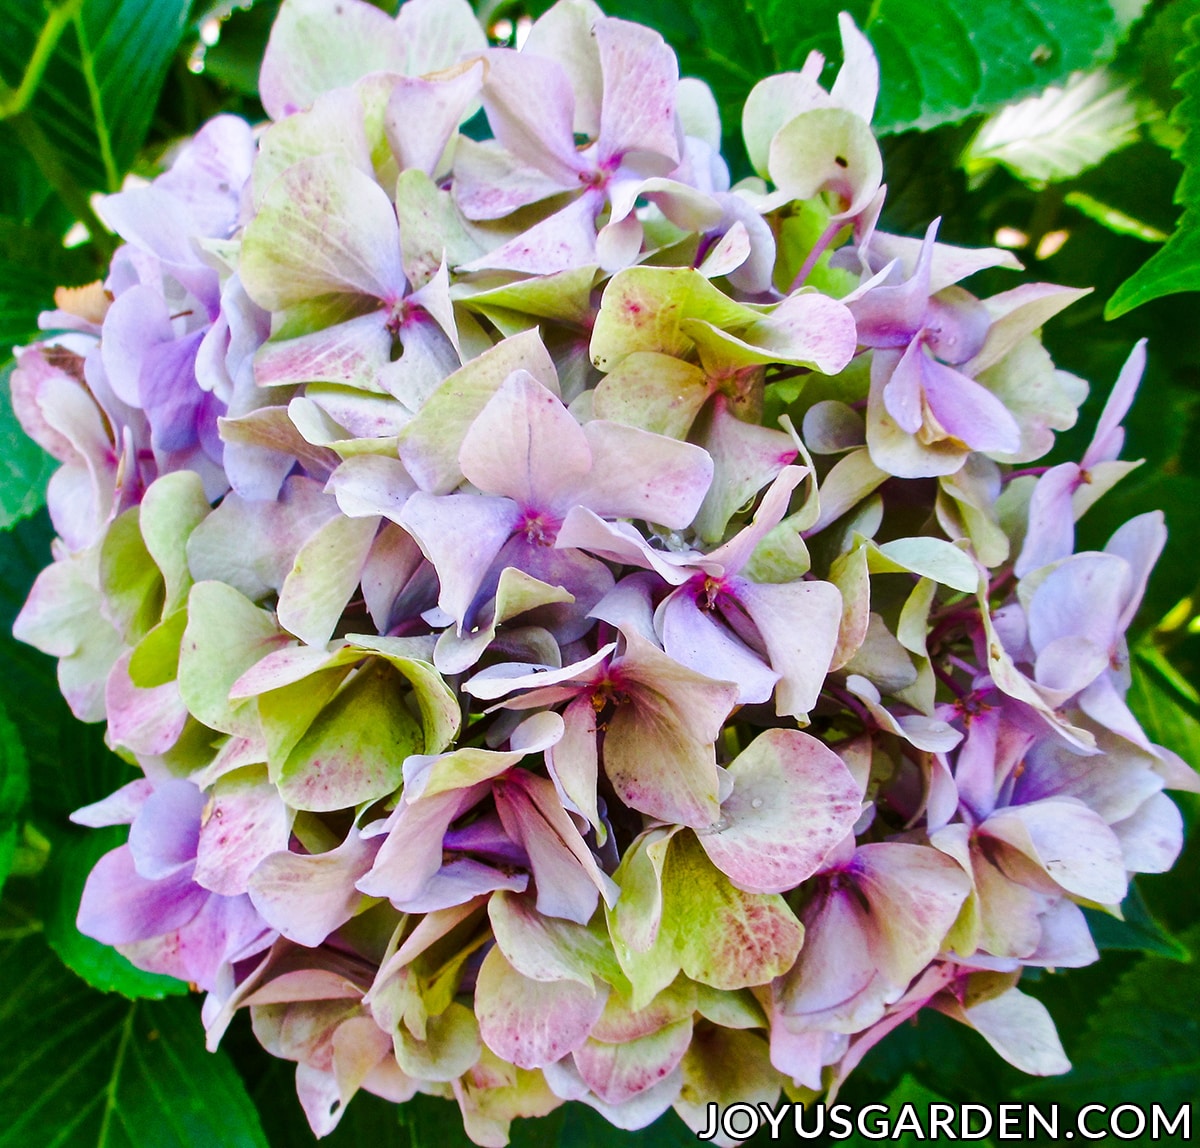 Close up of a mophead hydrangea flower which is lavender & green in coloration.